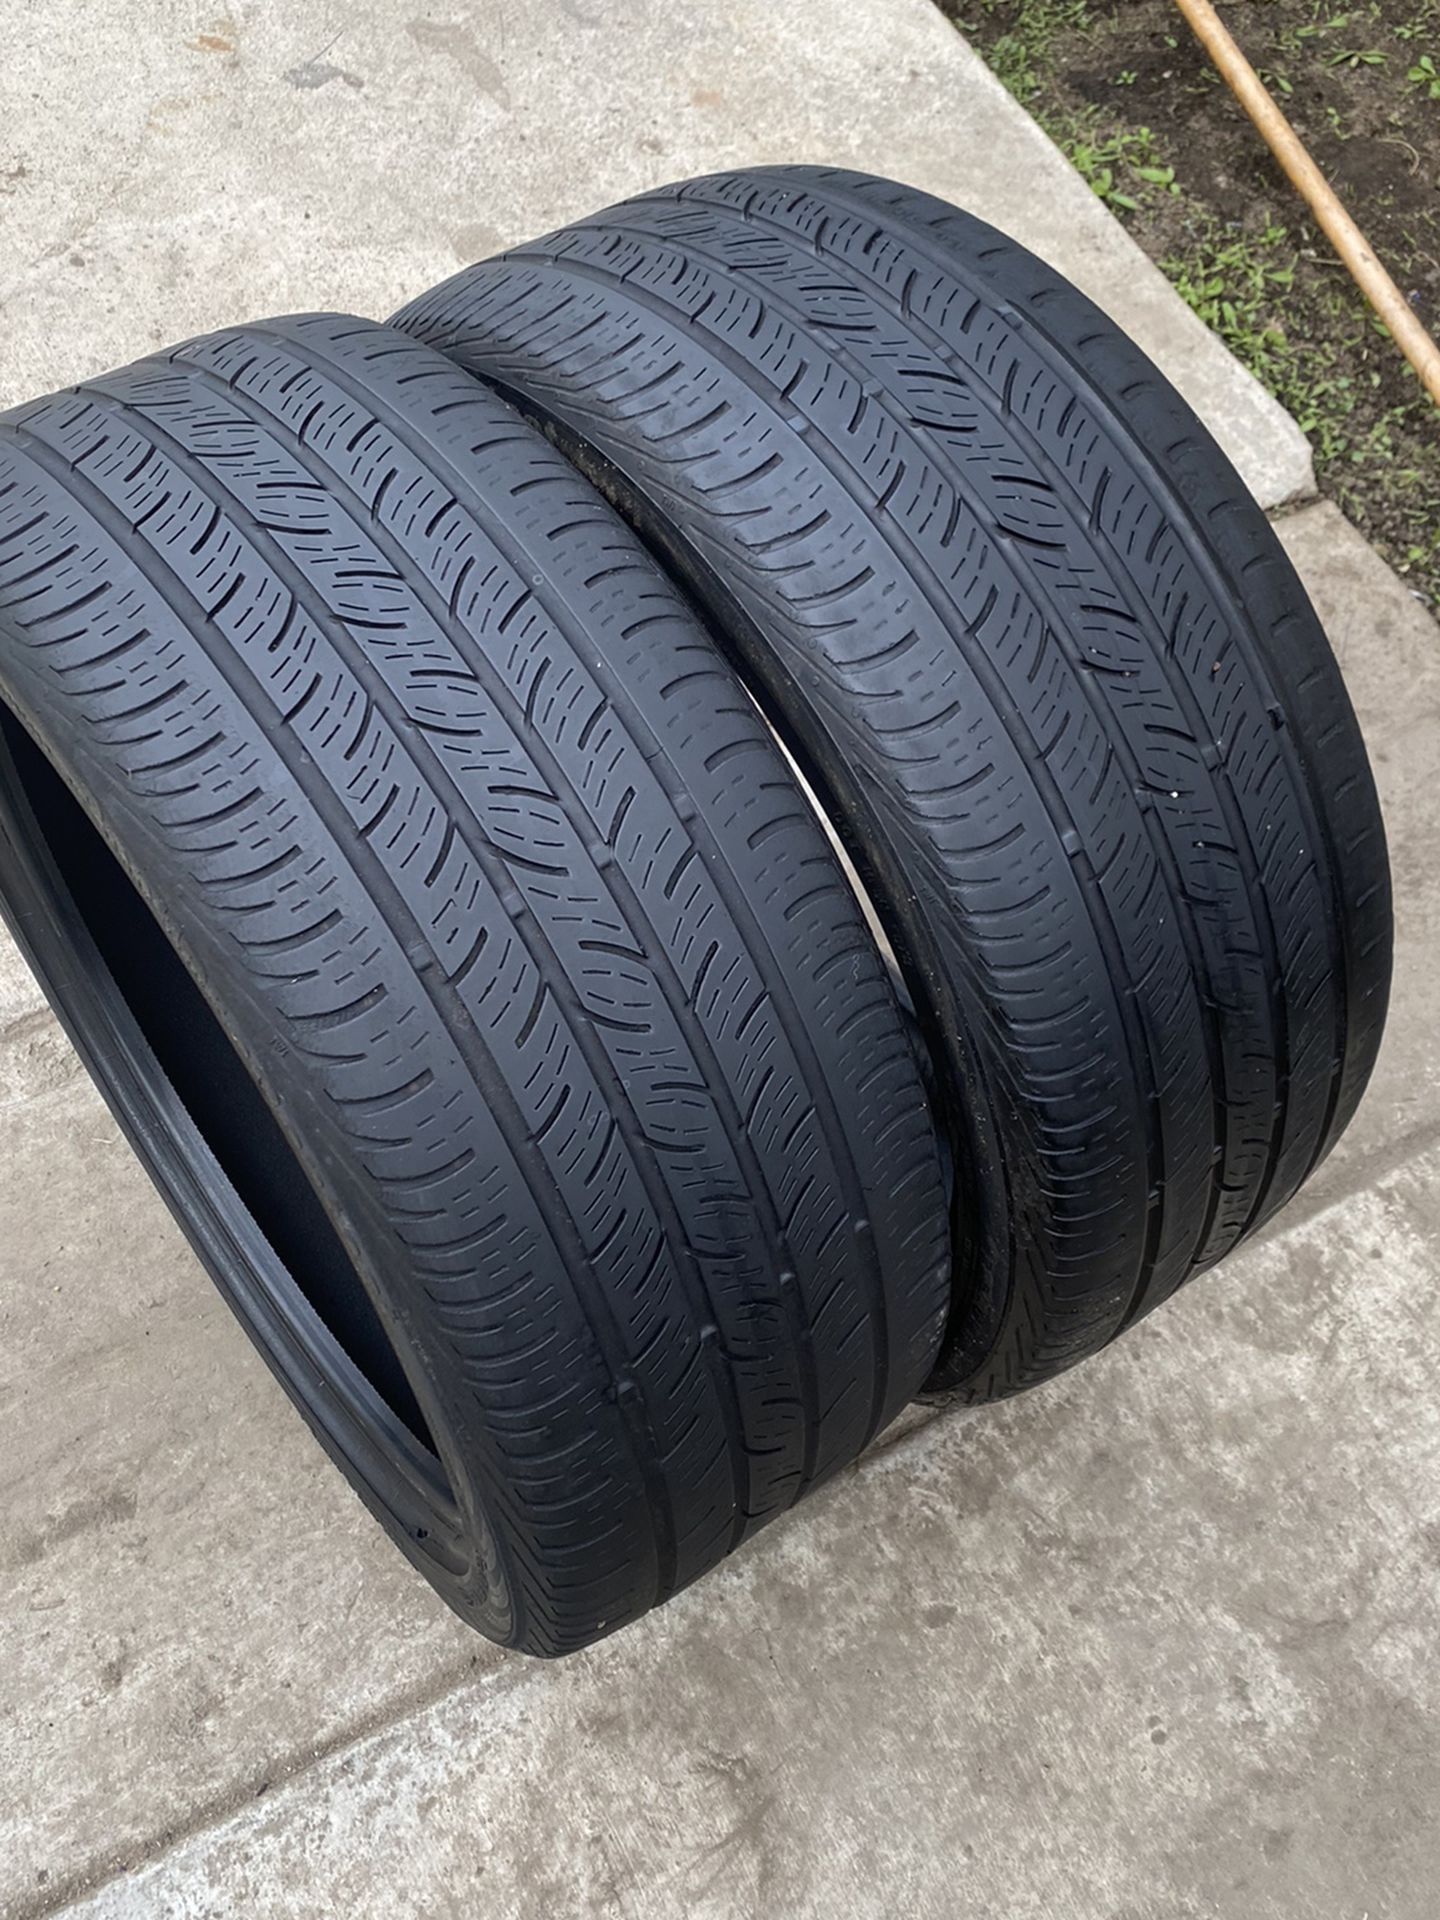 2 tires 225/40/18 continental